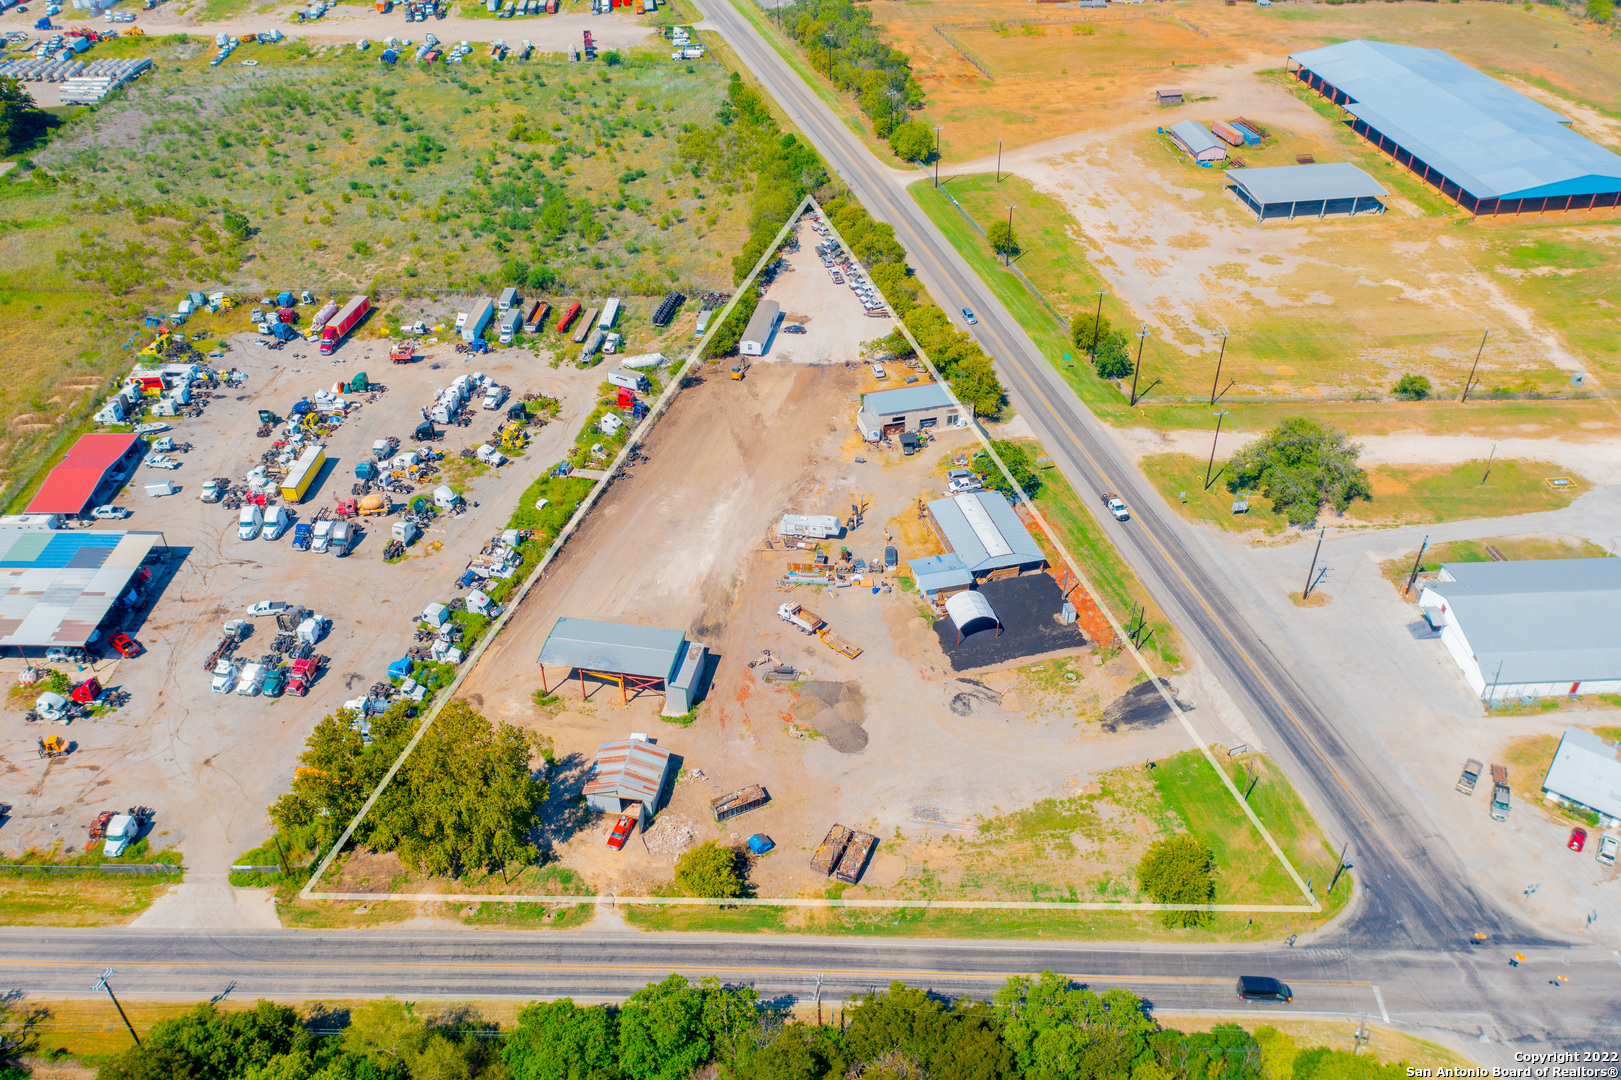 Large 2.8 acre corner lot commercial property in a great location! This industrial use lot includes a modular office, 2 carports, and additional storage buildings. You can make use of any structures currently on the property, or clear it and build new structures. Close and easy access to the major freeways like I-10, 410 and 1604. The property is also located minutes away from HEB, Dollar General, and Amazon warehouses.